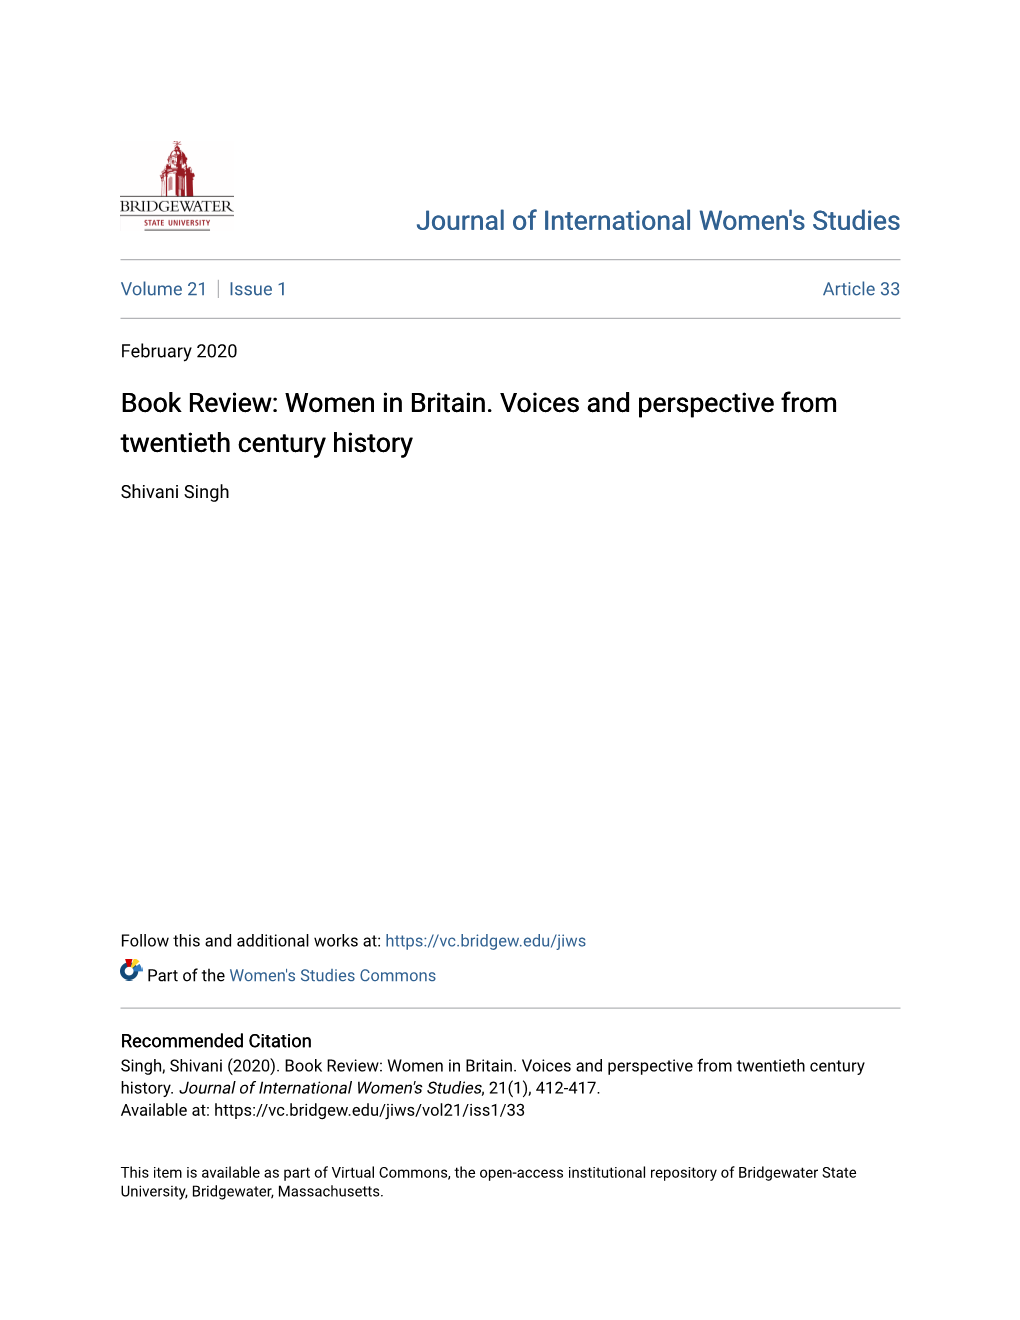 Women in Britain. Voices and Perspective from Twentieth Century History